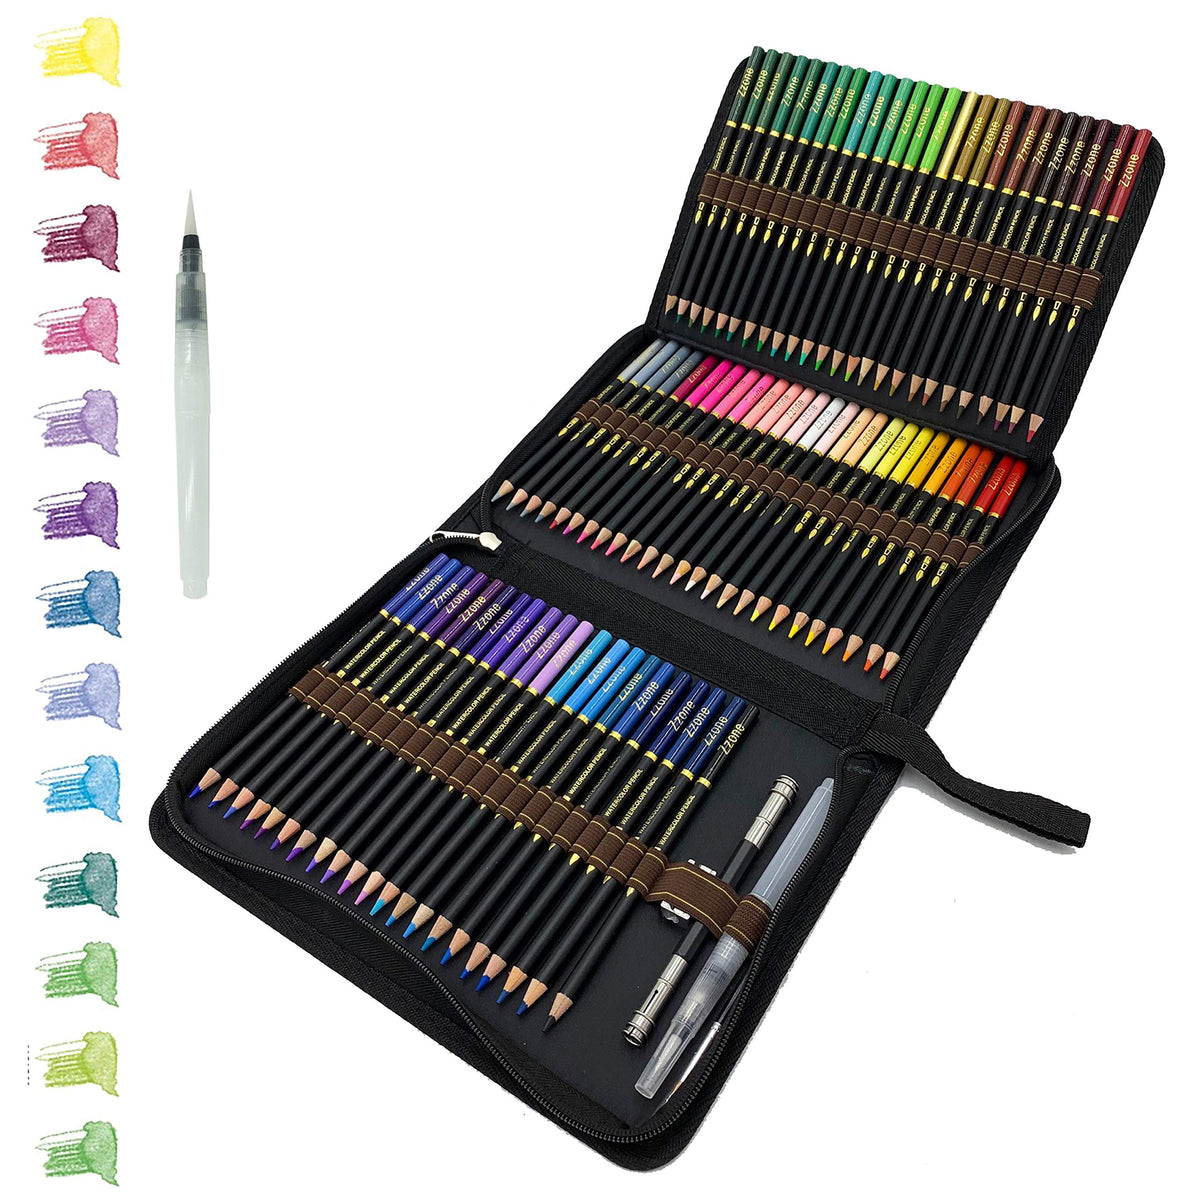 Jaking Creart Master 85 PC Drawing Set Sketch Kit,Pro Art Suppies|7 Type  Watercolor,Drawing,Coloring,Sketch and DIY Paper|Tutorial|Quality